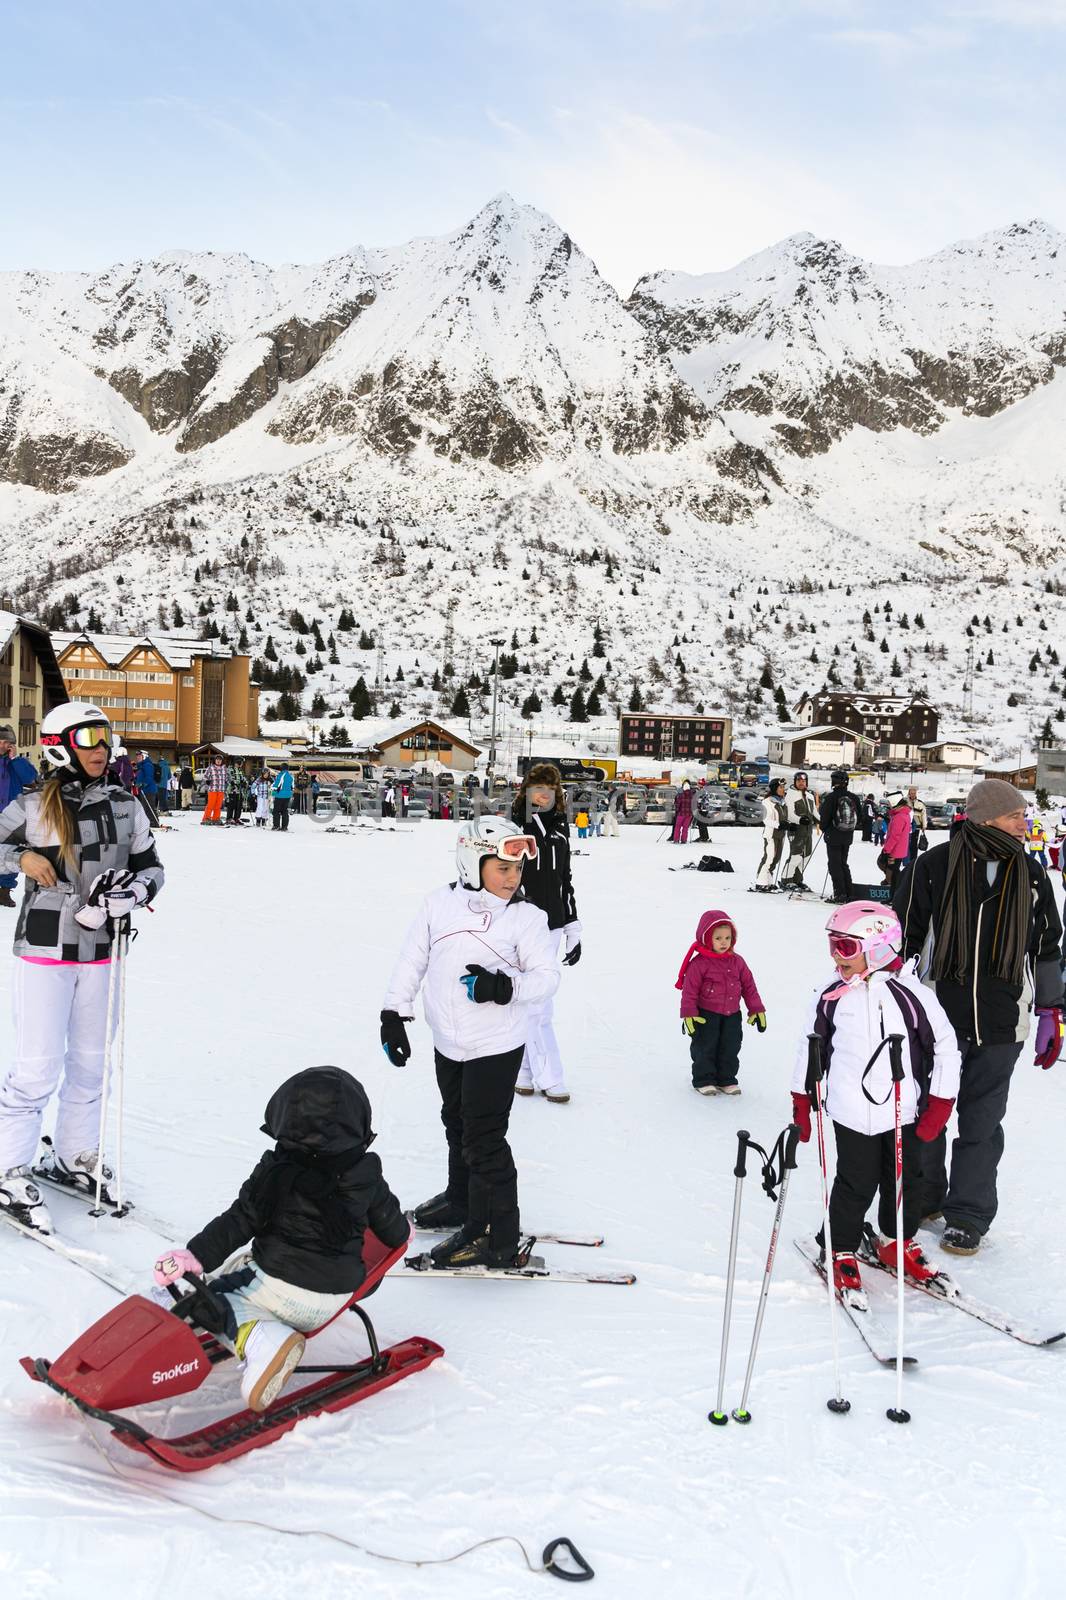 PONTE DI LEGNO, Italy - December 25: Families on holiday on the slopes of the Italian Alps on Thursday, December 25, 2014.